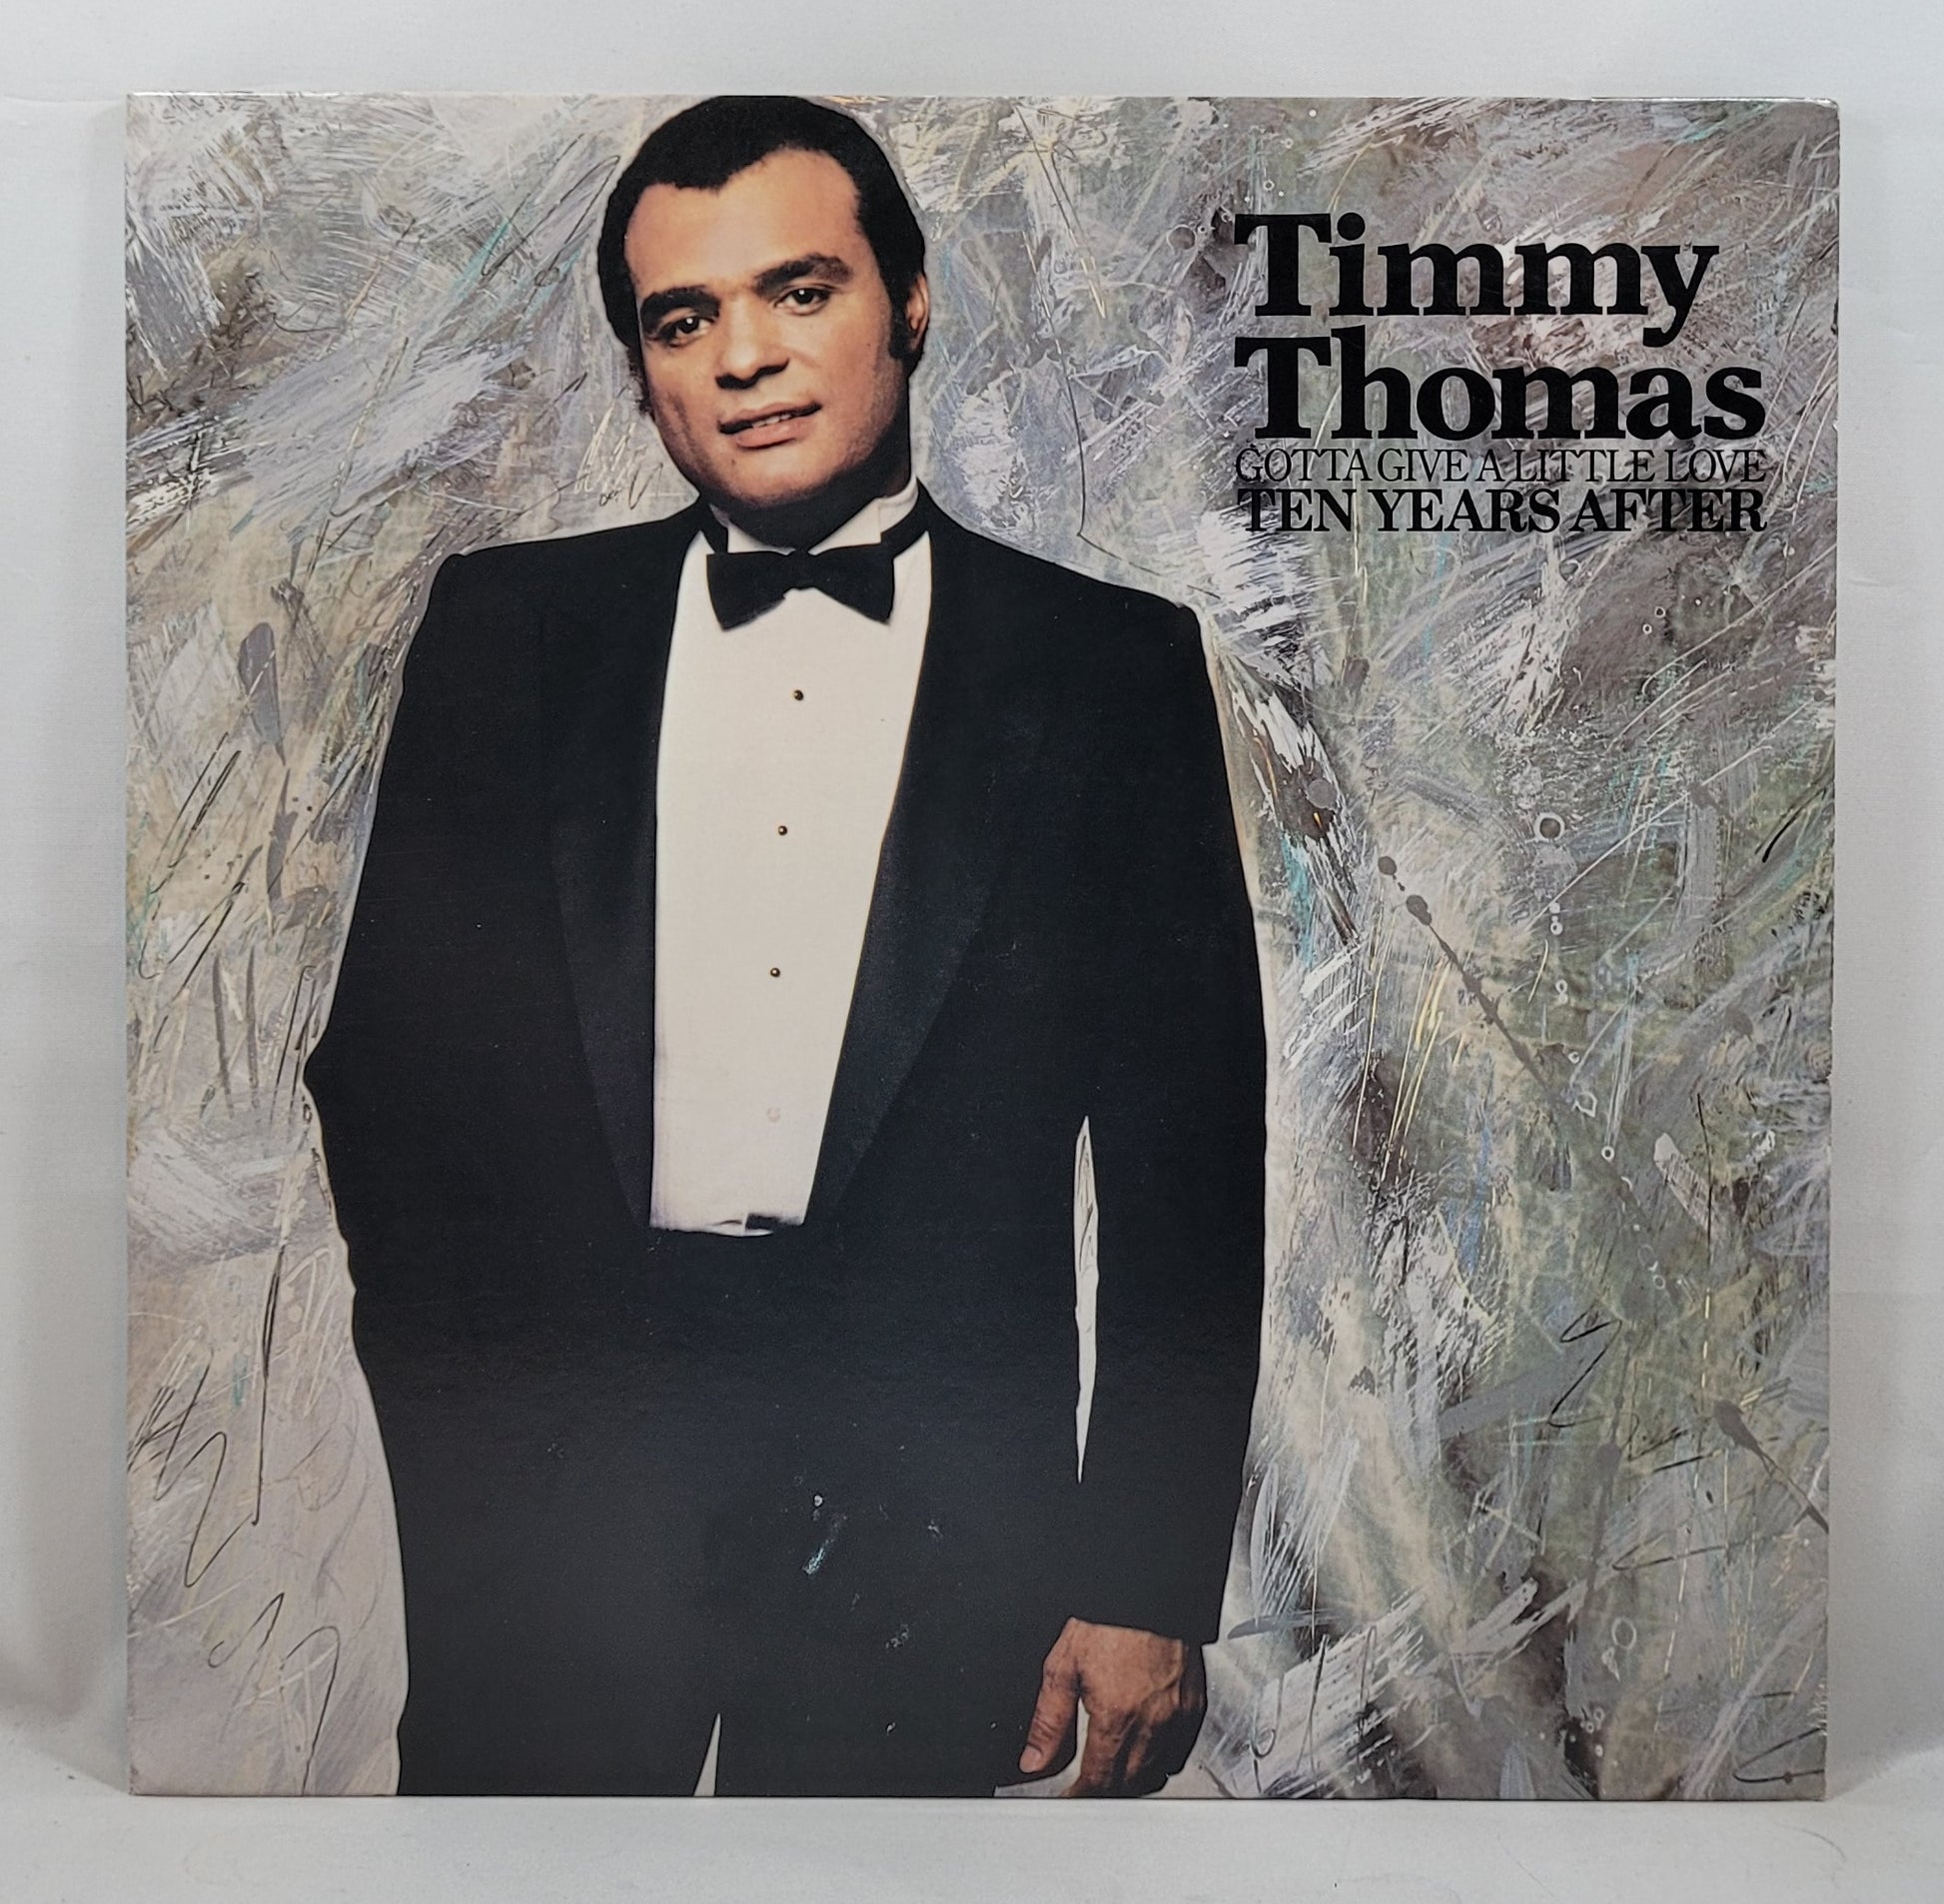 Timmy Thomas - Gotta Give a Little Love (Ten Years After) [1984 Used Vinyl Record LP]